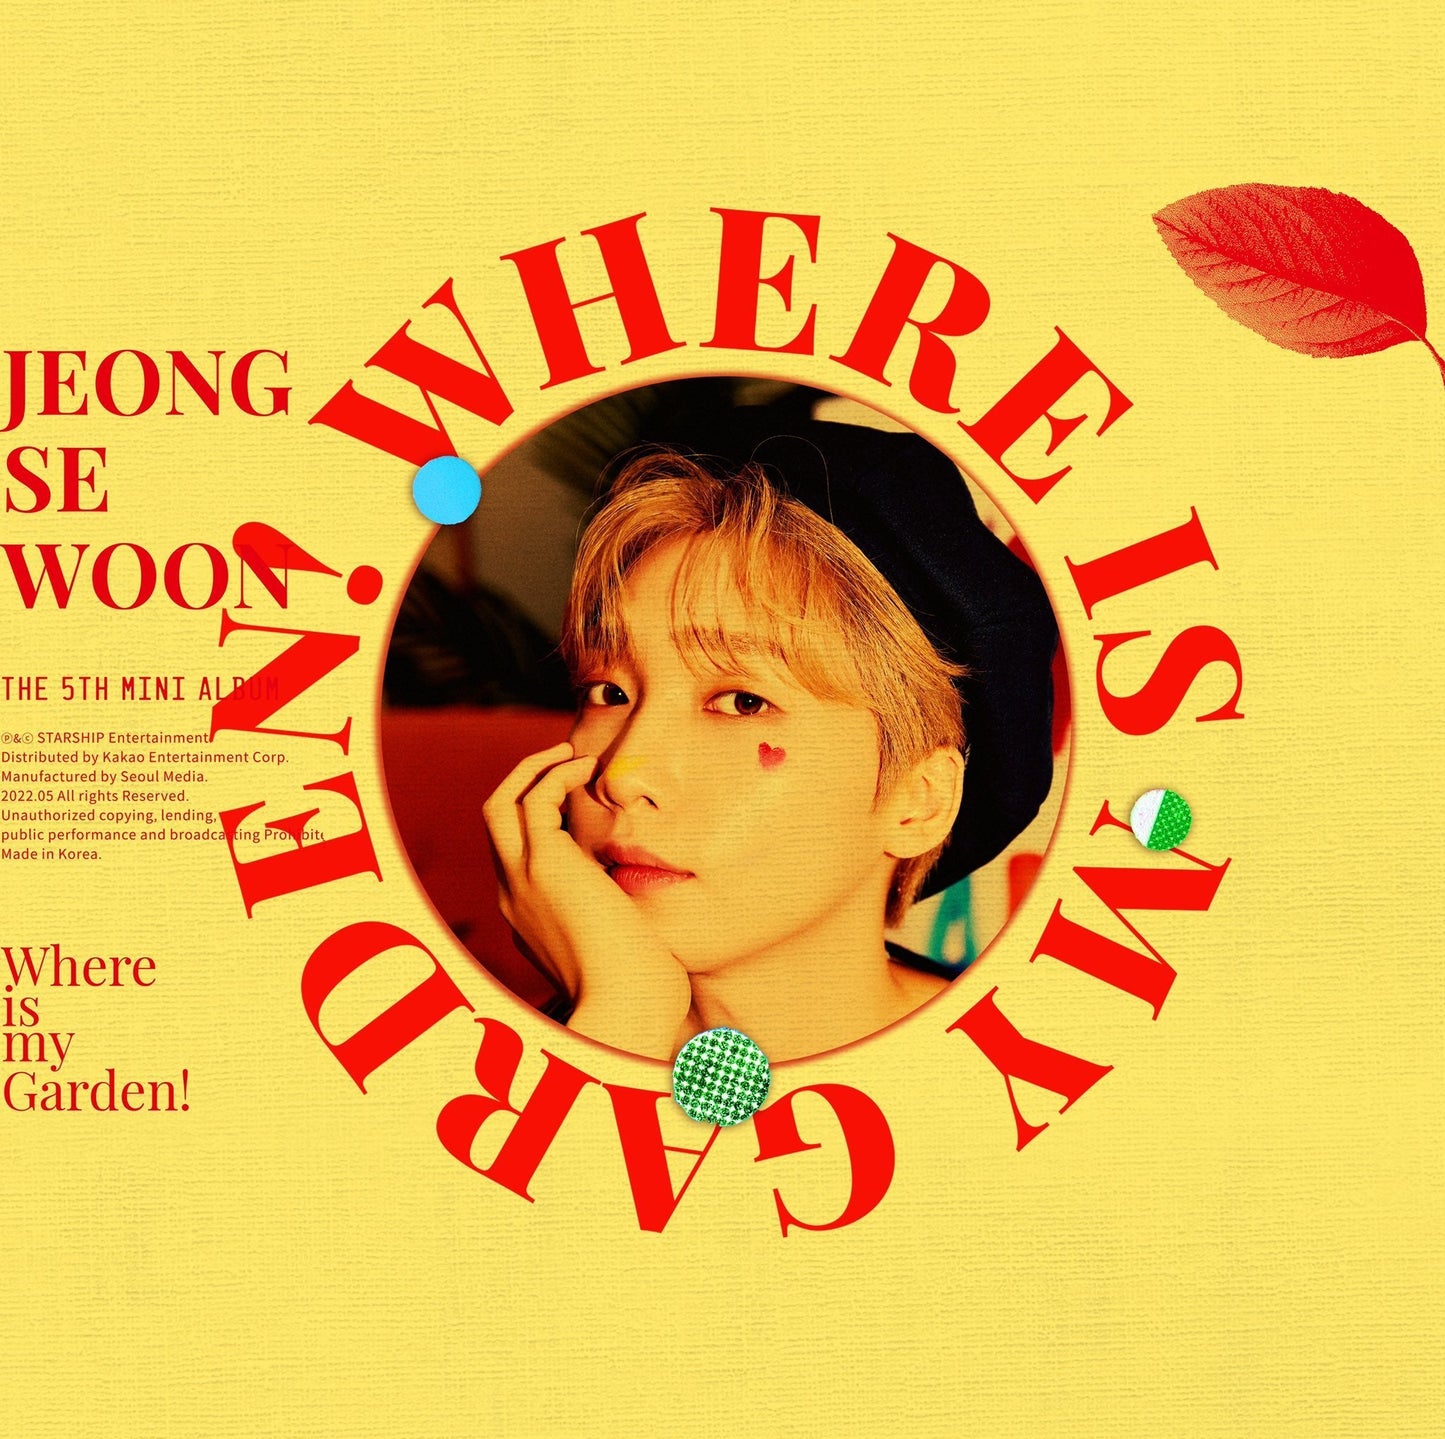 Jeong Sewoon - Where is my Garden